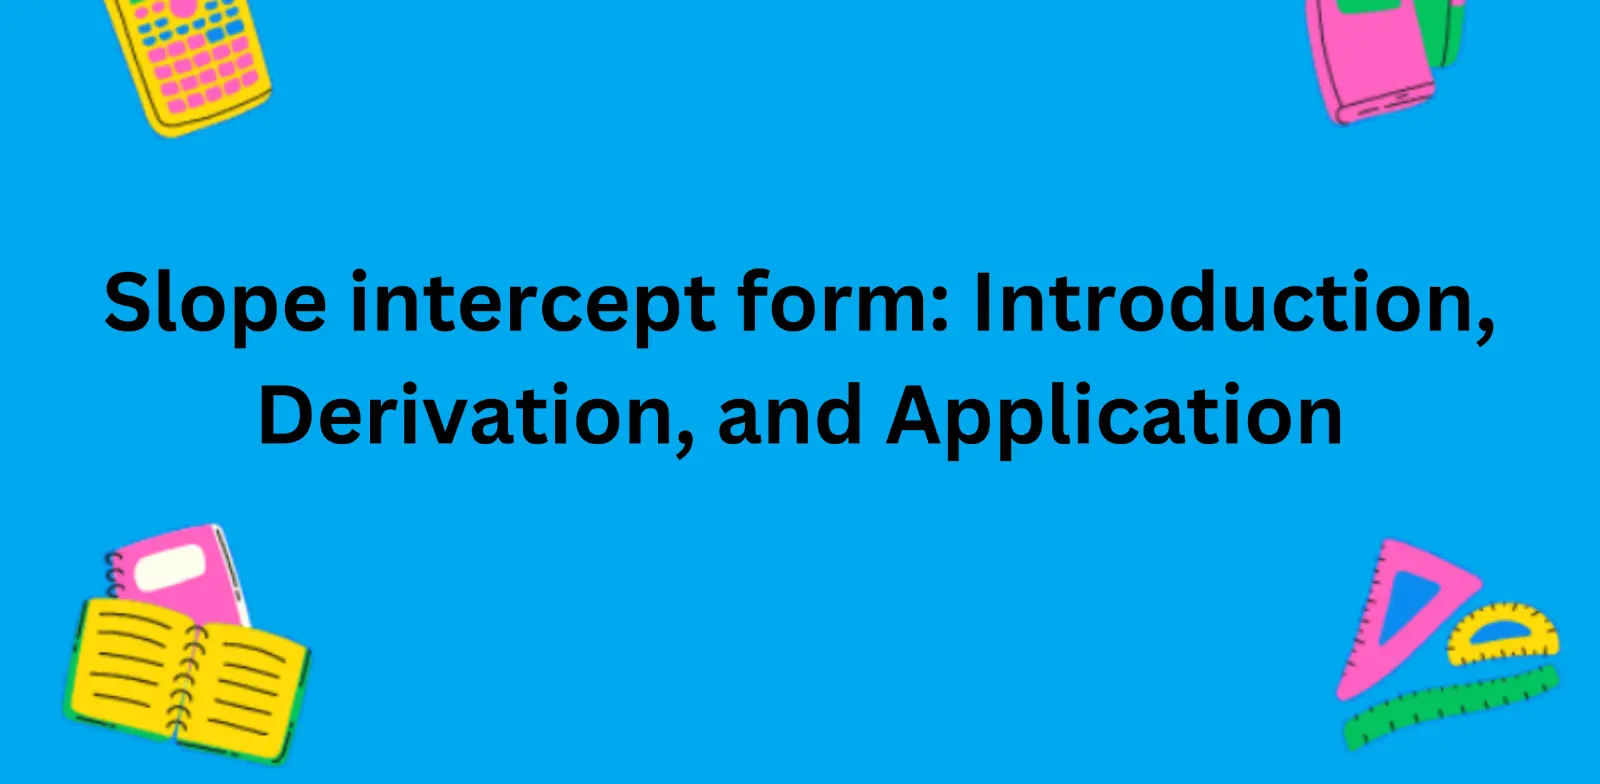 Slope intercept form Introduction, Derivation, and Application